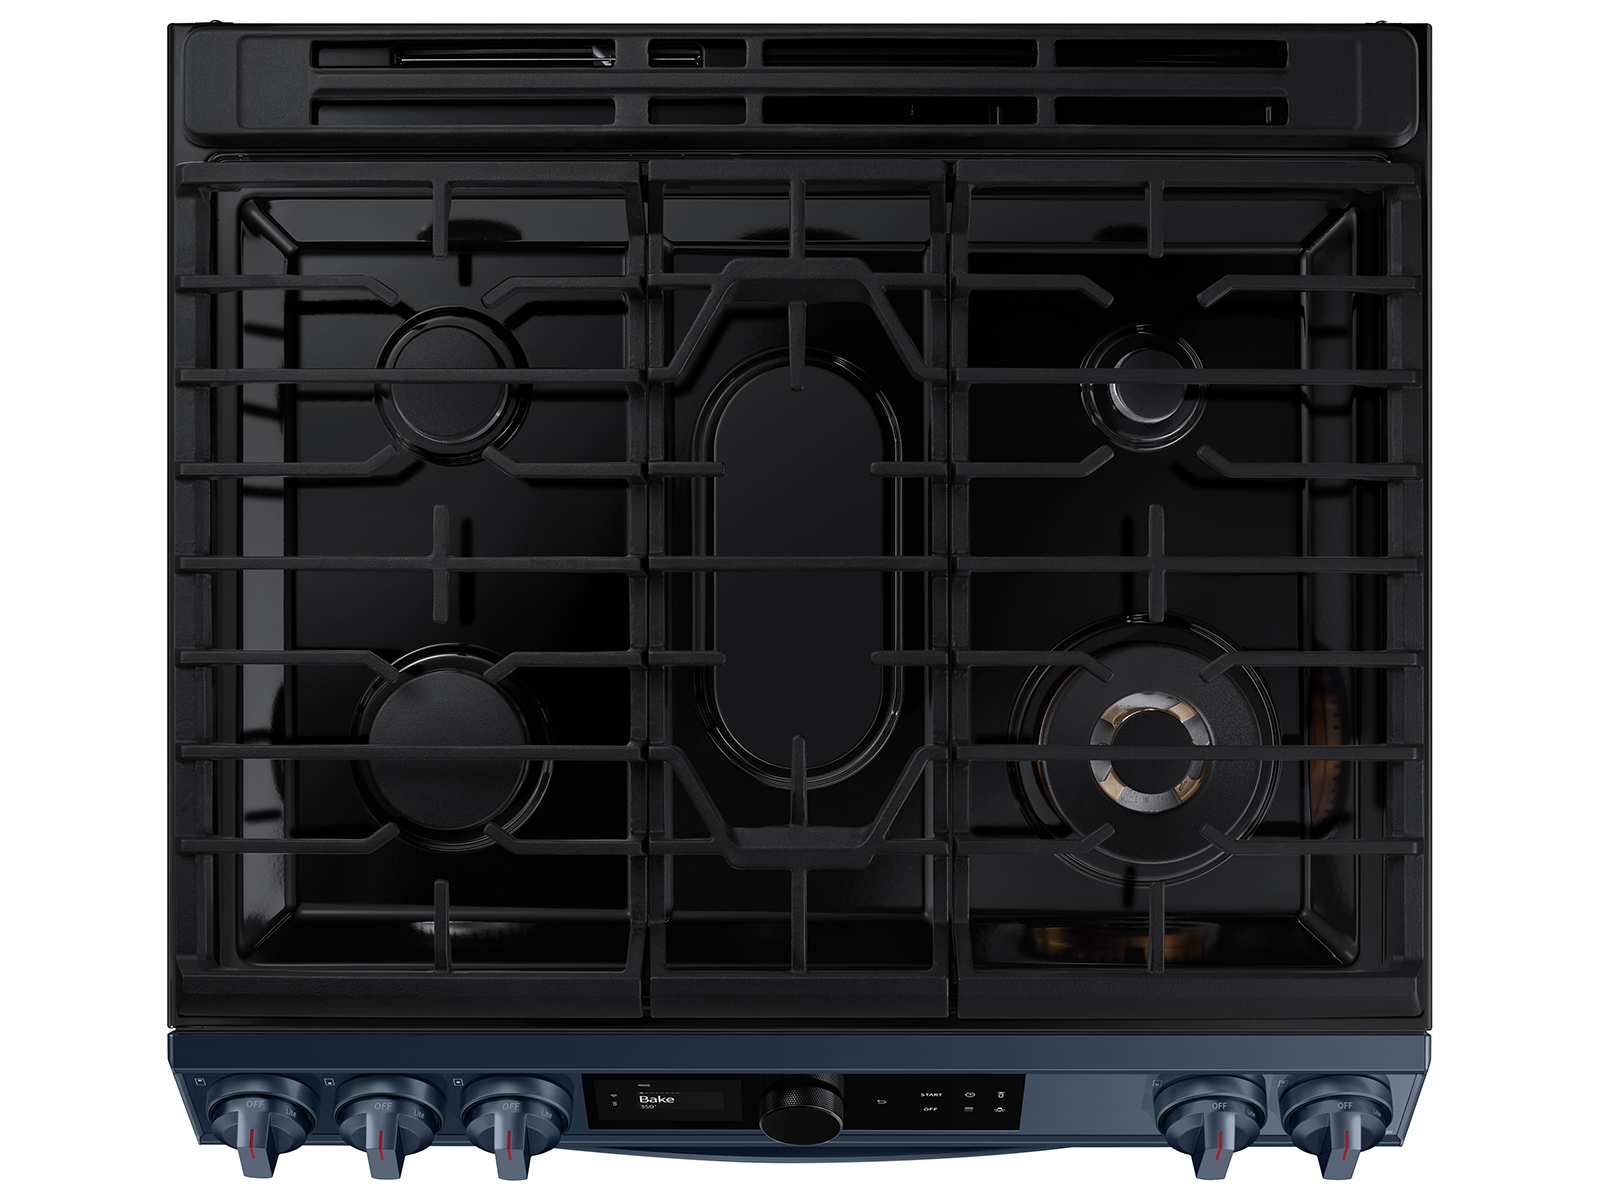 Thumbnail image of Bespoke Smart Slide-in Gas Range 6.0 cu. ft. with Smart Dial, Air Fry &amp; Wi-Fi in Navy Steel